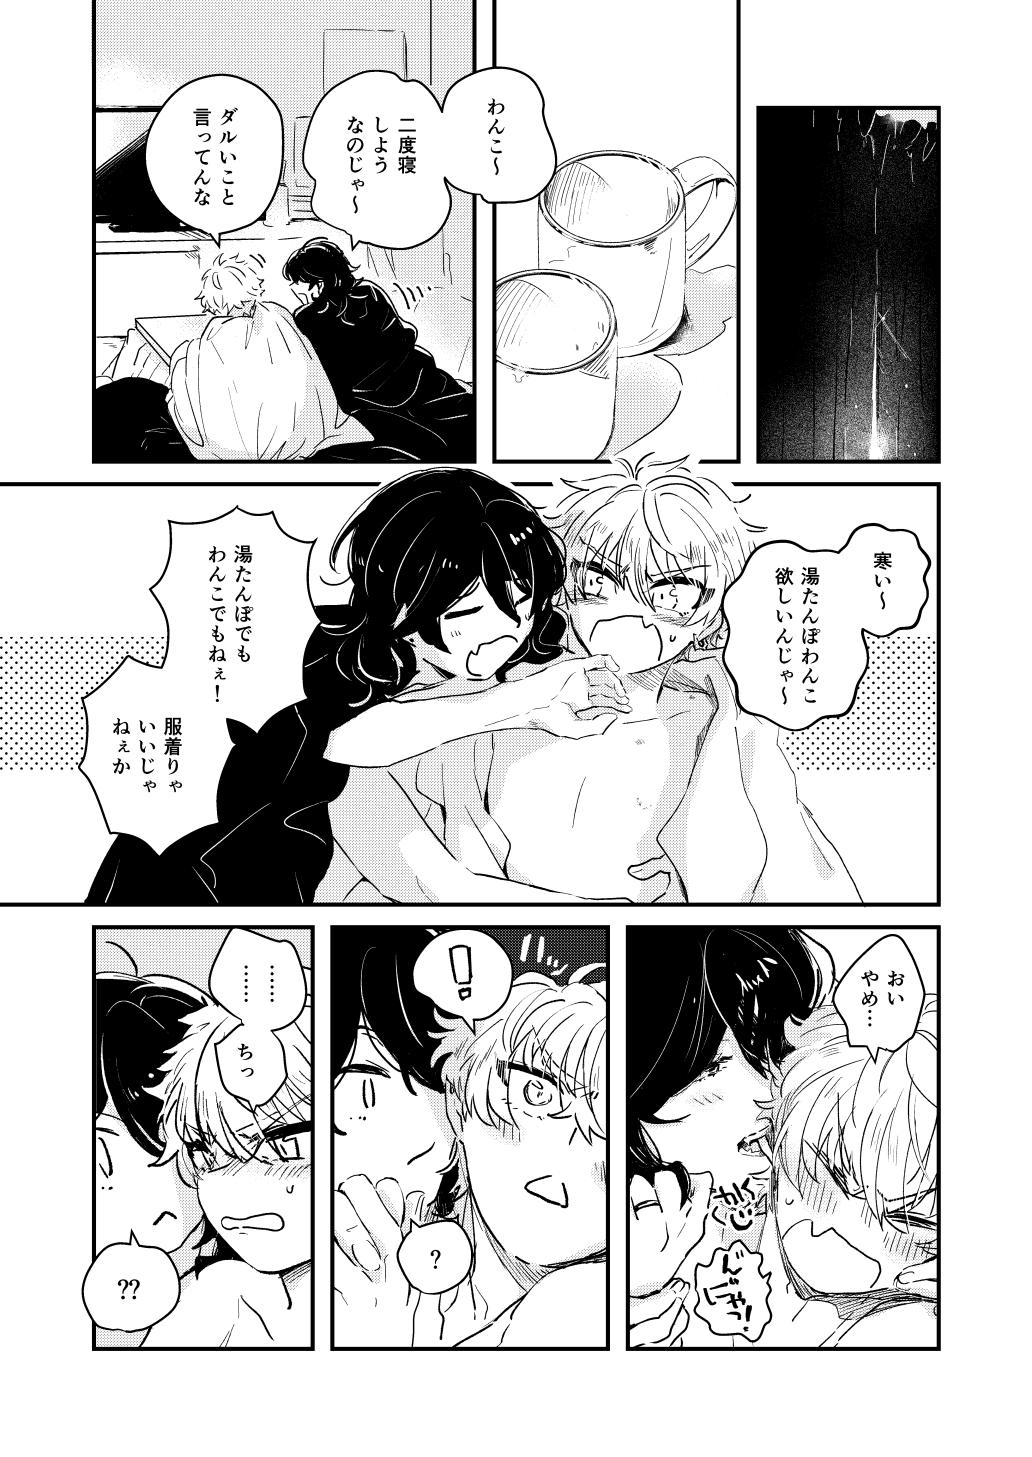 Tanned morning engage - Ensemble stars Pure 18 - Page 5